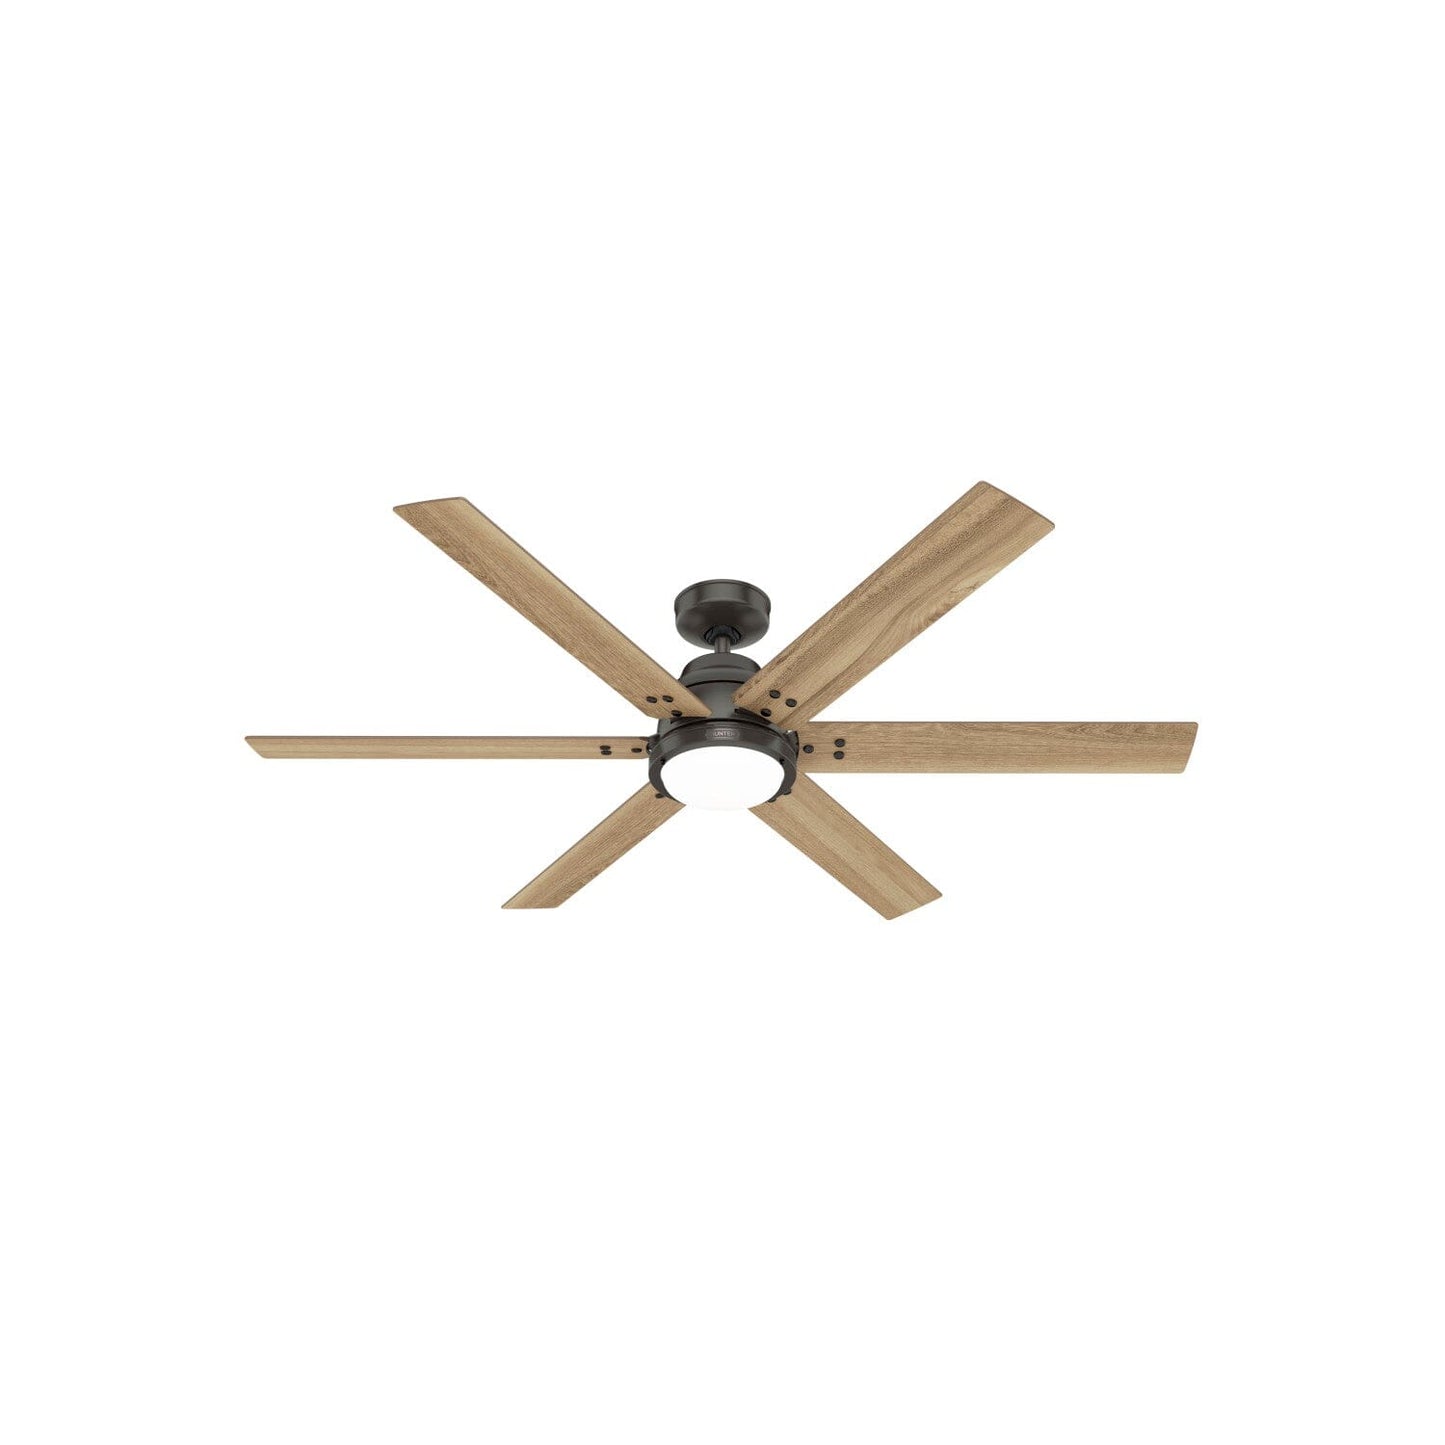 Gravity ENERGY STAR with LED light 60 inch with Remote Ceiling Fans Hunter Noble Bronze - Golden Maple 